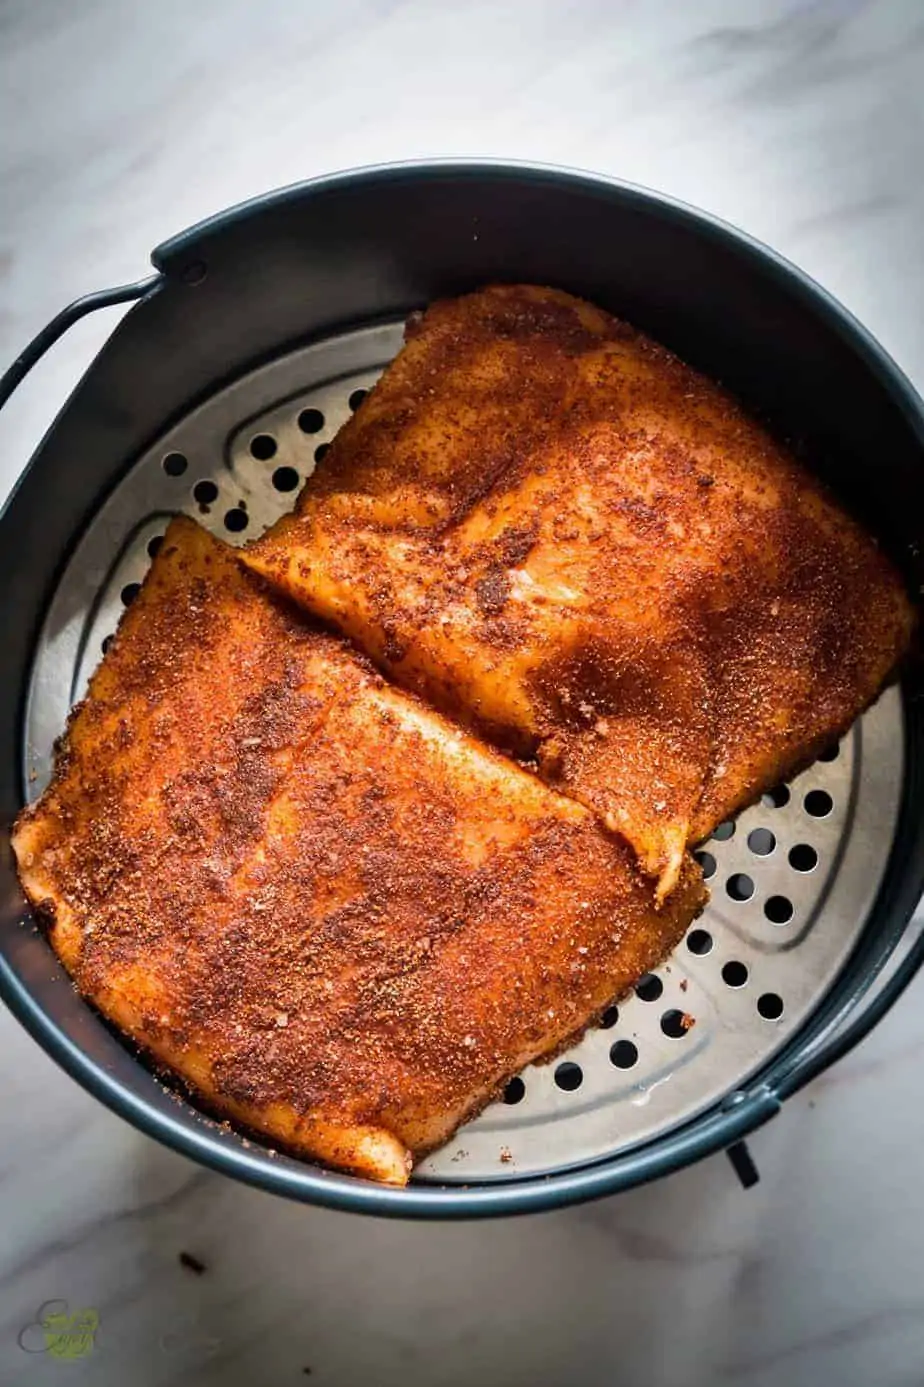 2 pieces of seasoned salmon in the air fryer basket before cooking